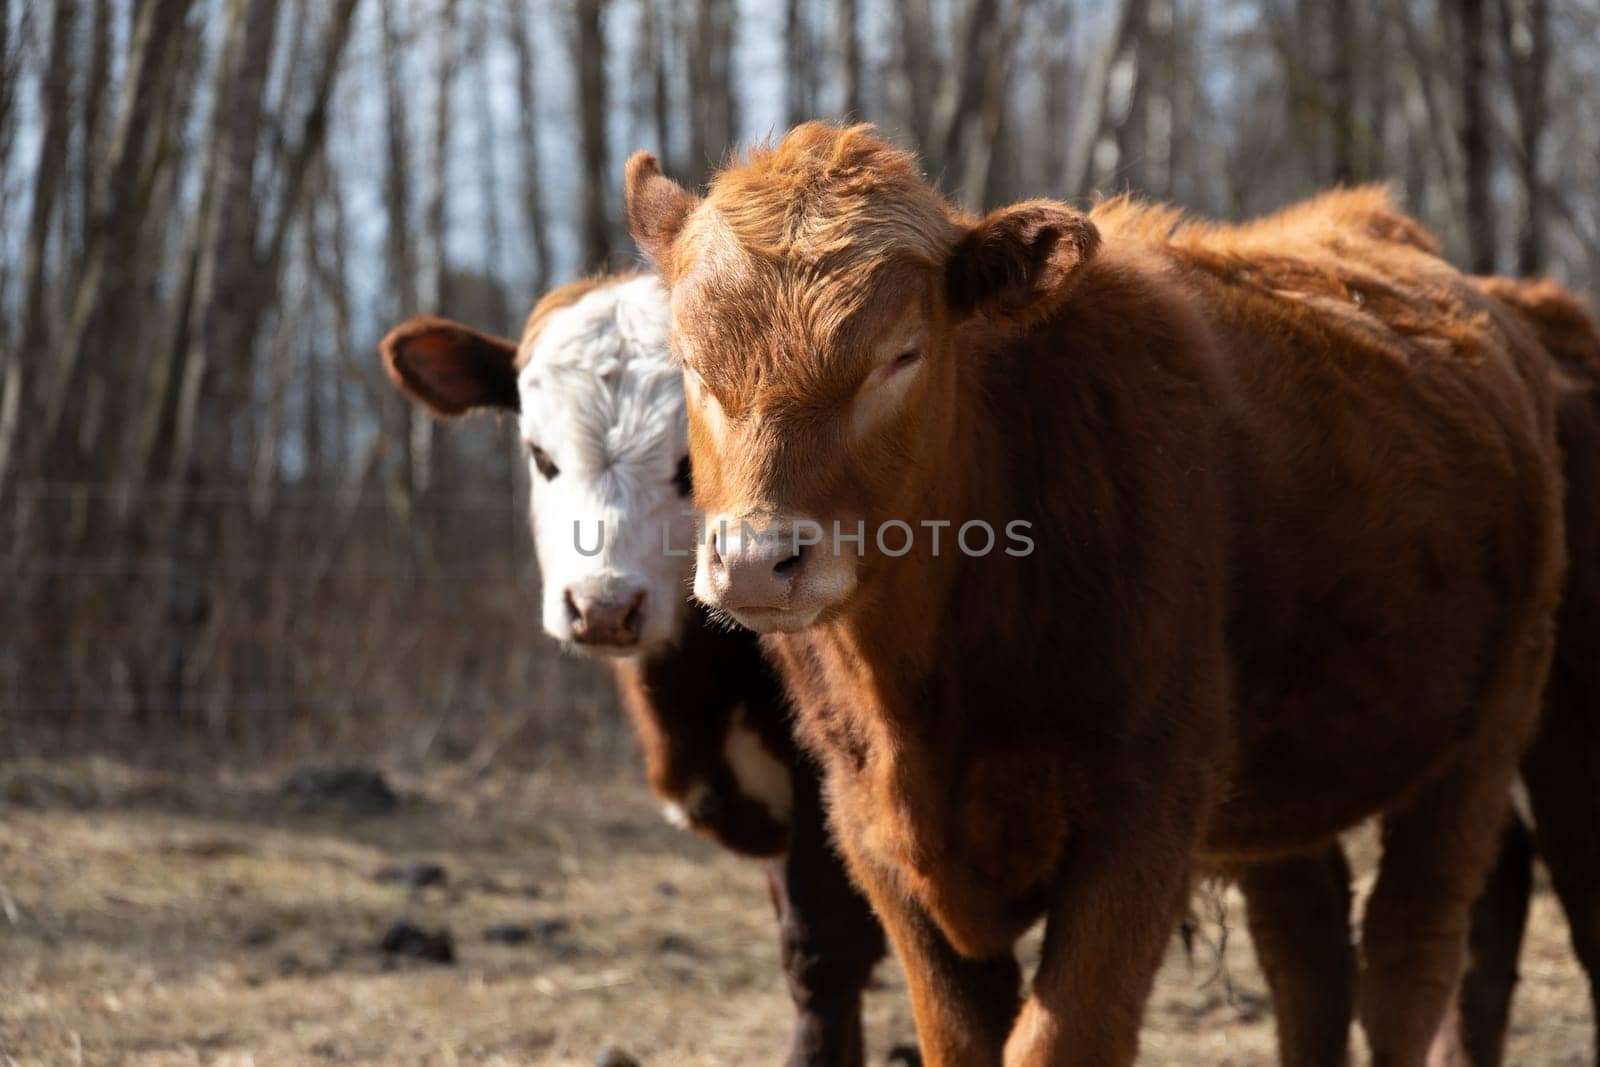 Two brown cows are standing next to each other in a field. They are looking around and grazing on the grass under the clear sky.